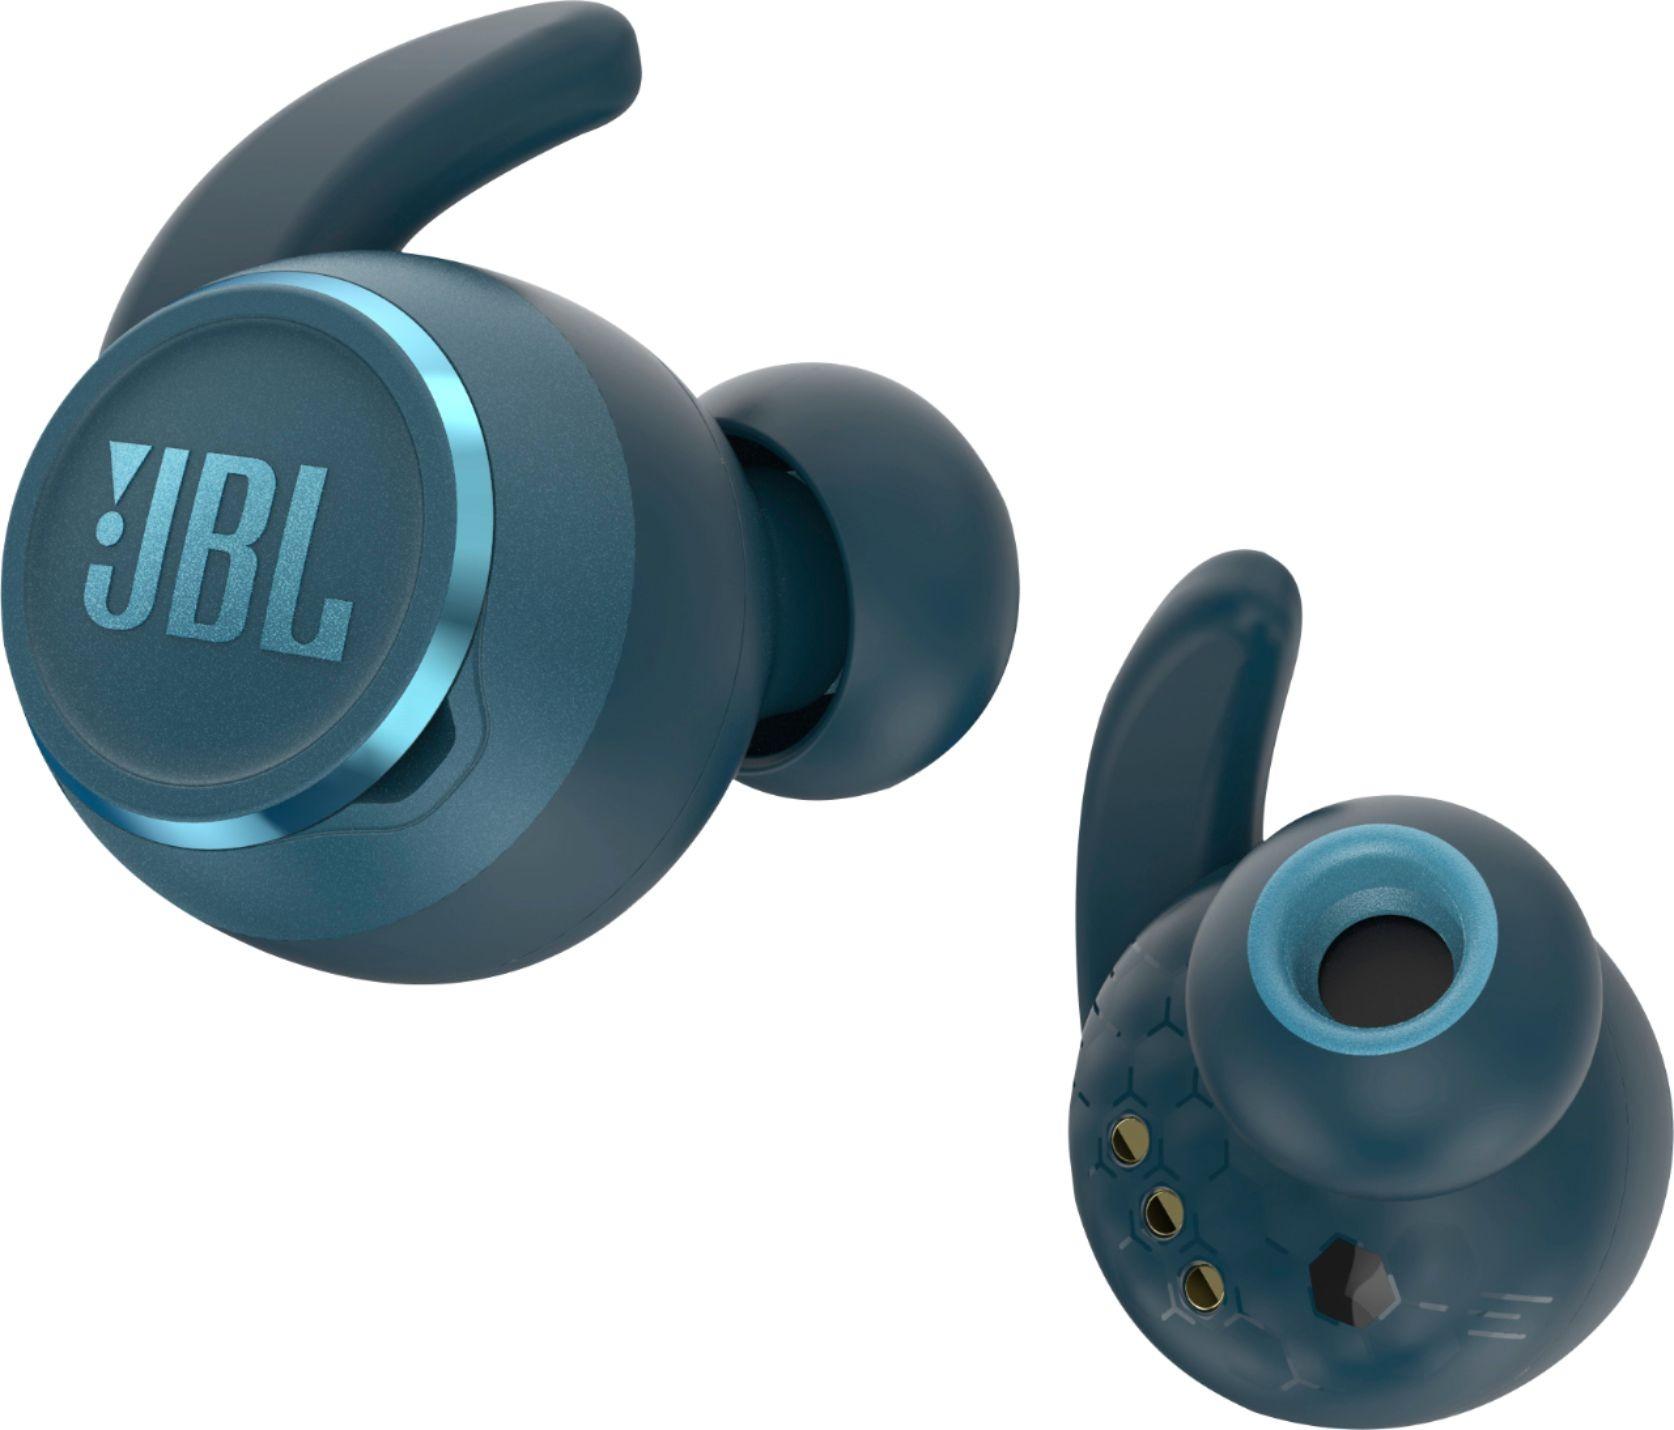 This deal ends in 4 hours! JBL's Reflect Mini Earbuds are currently $39.99, but only for the next 4 hours. Originally priced at $149.99, that's well over a 50% discount and it won't last long. 21d5f866 6442549 rd